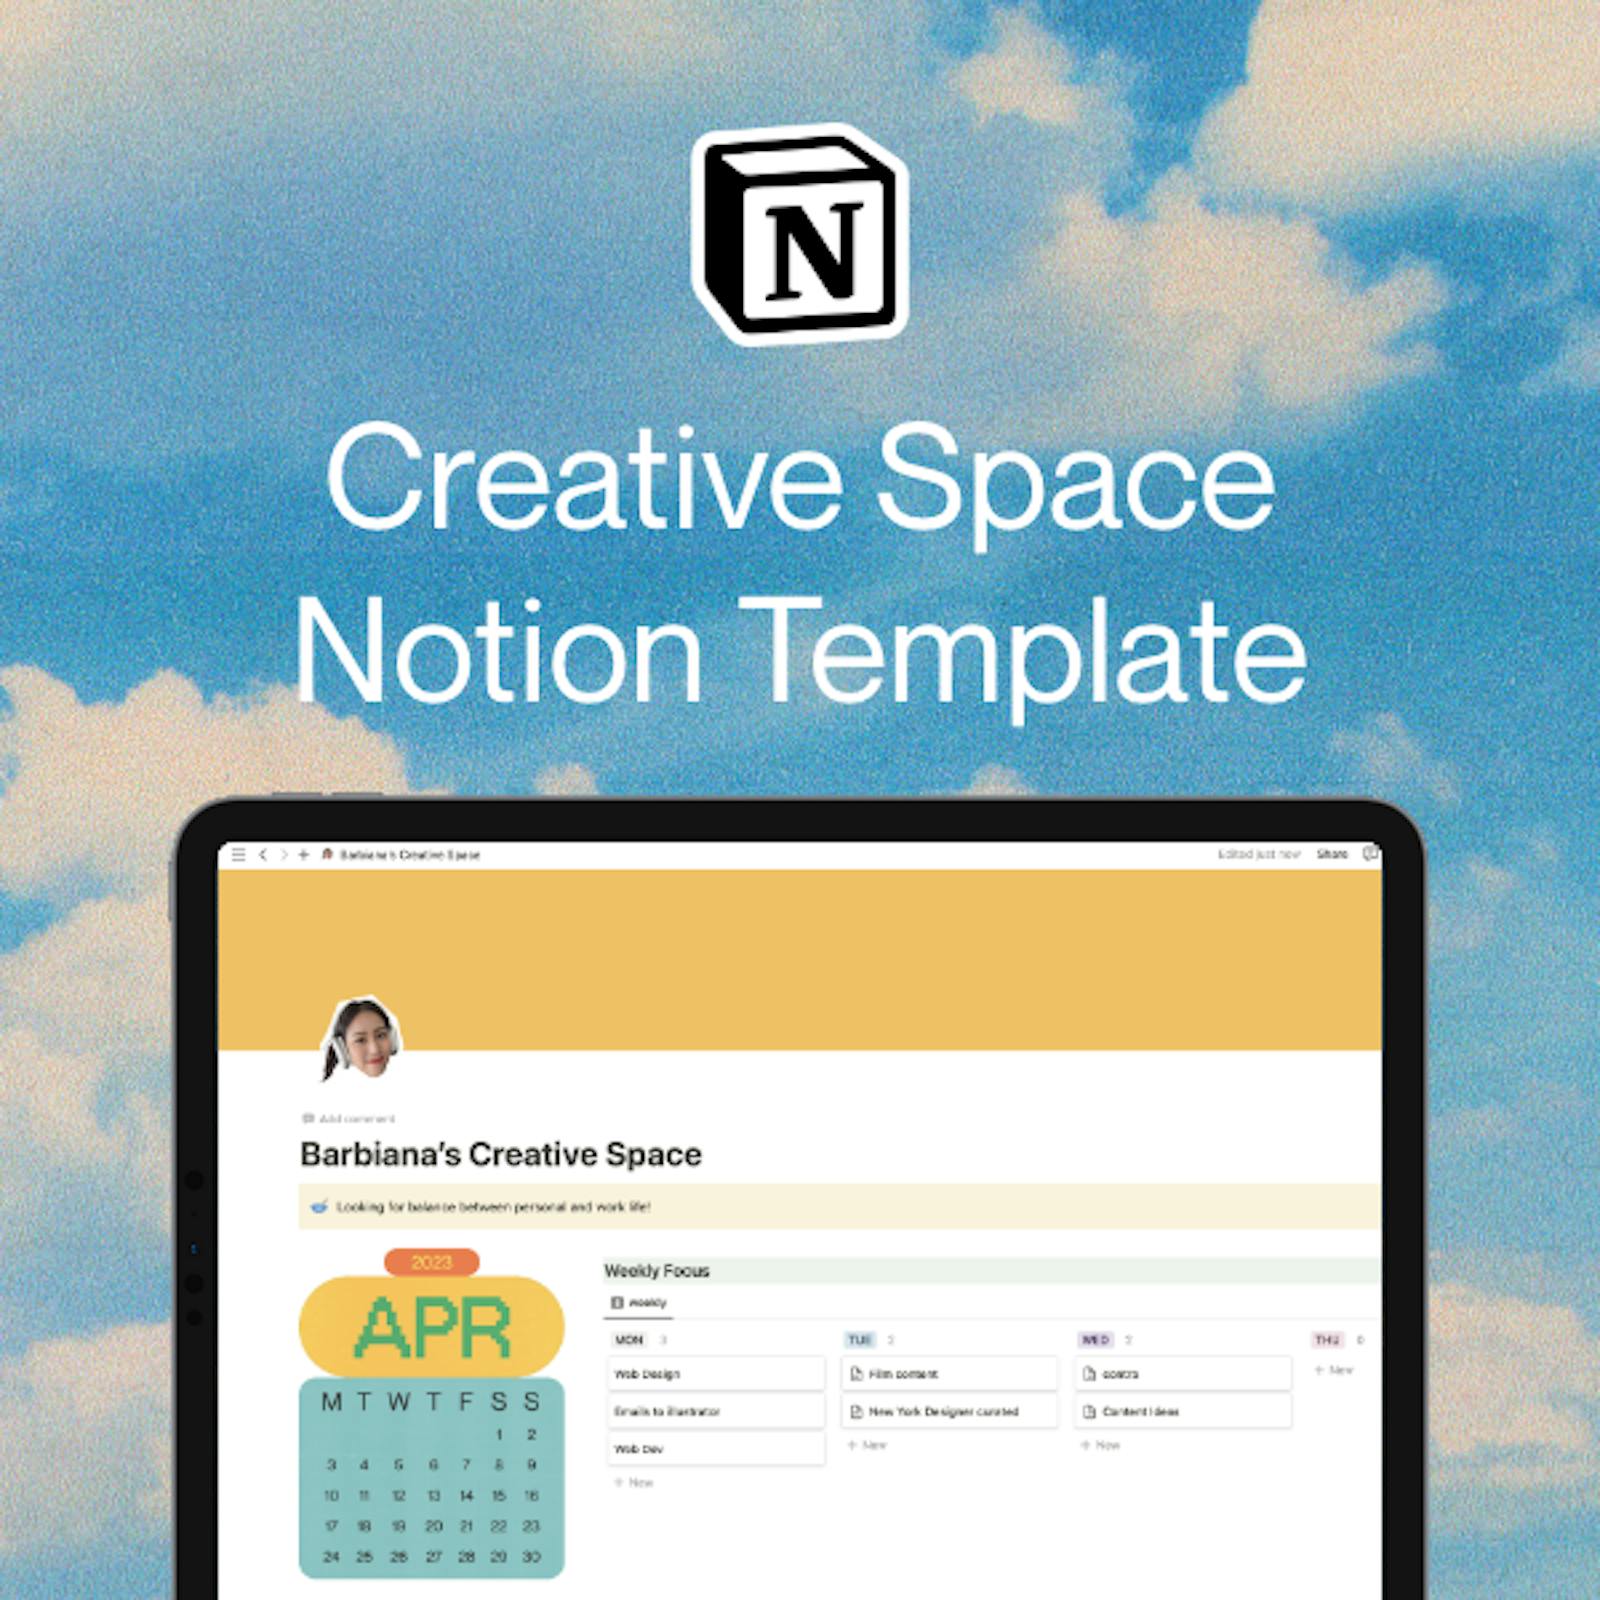 Creative Space Notion Template